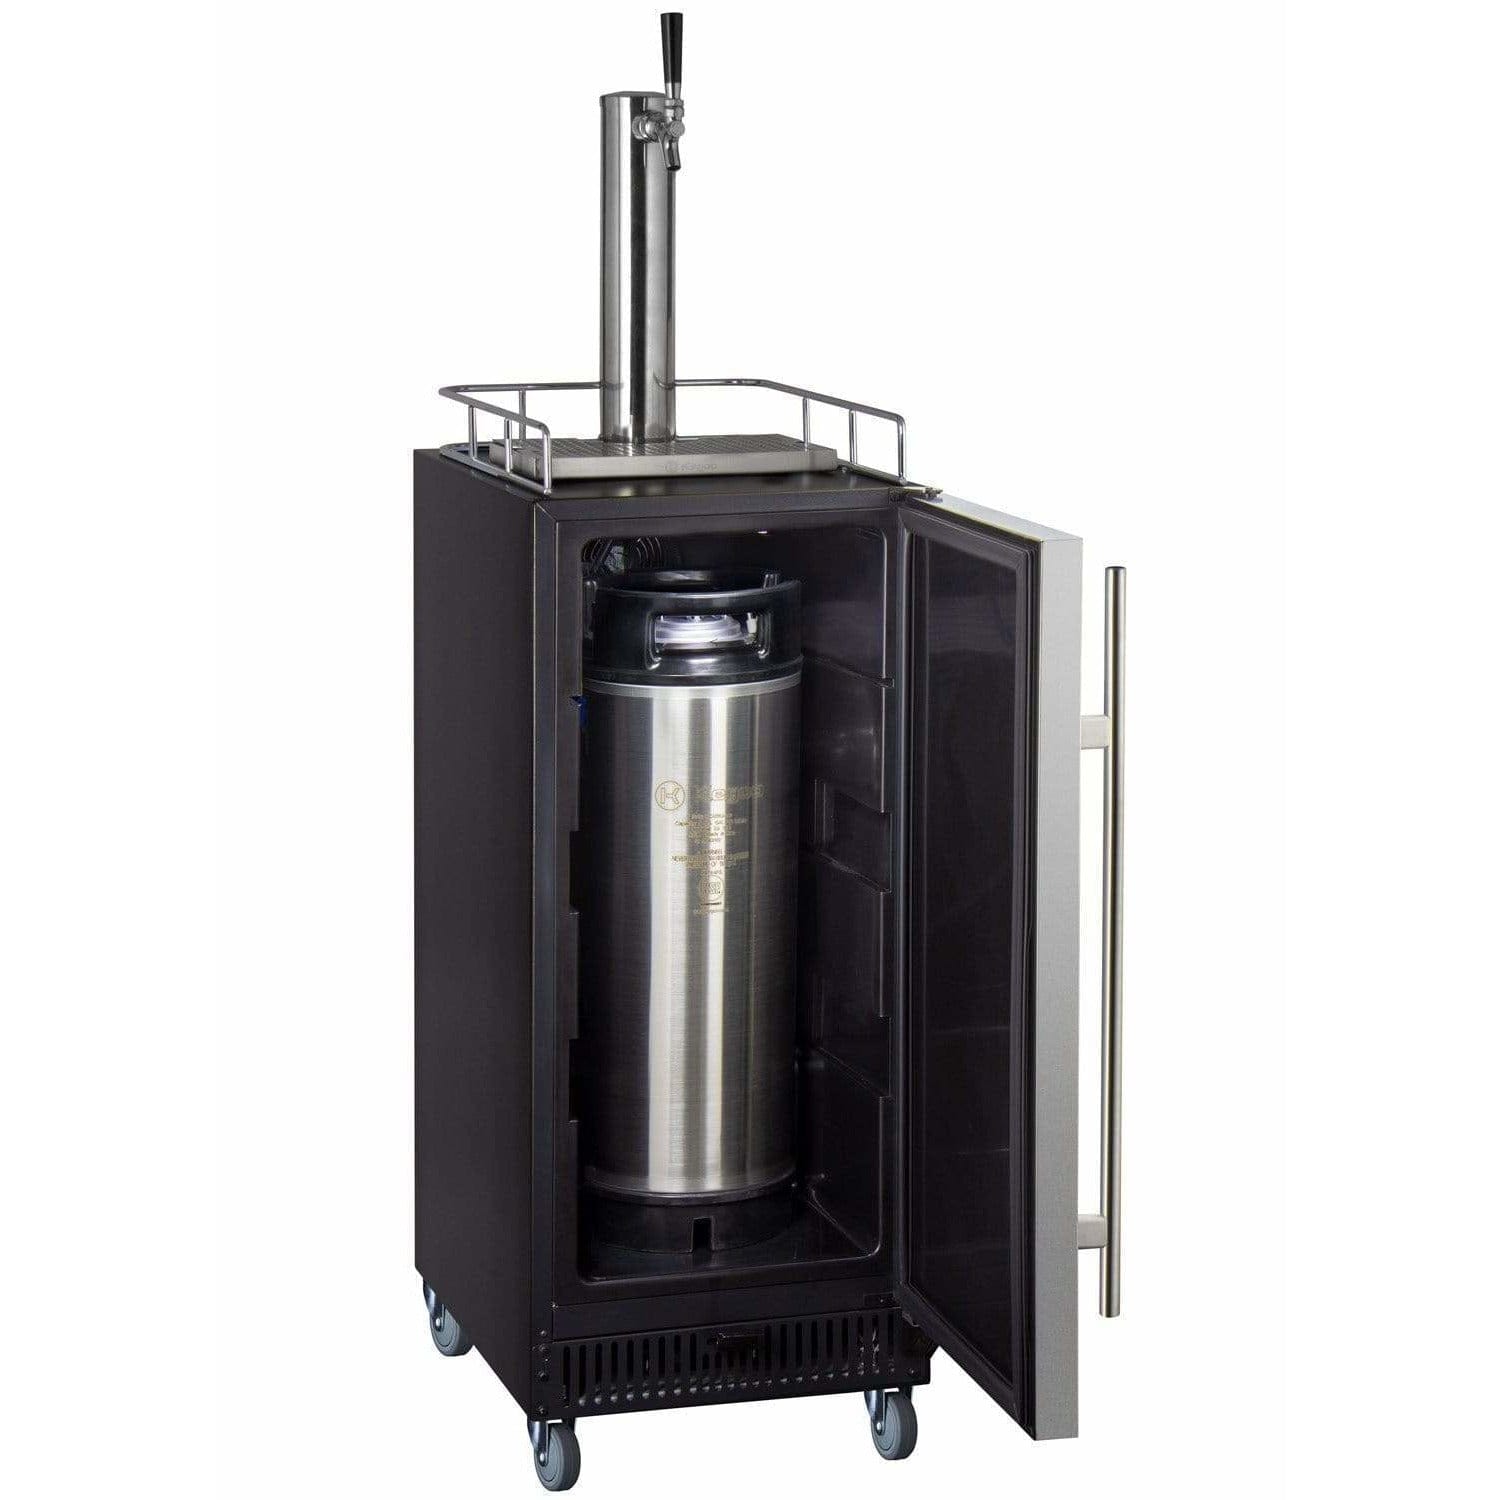 Kegco 15" Wide Cold Brew Coffee Single Tap Stainless Steel Kegerator ICS15BSR Wine Coolers Empire